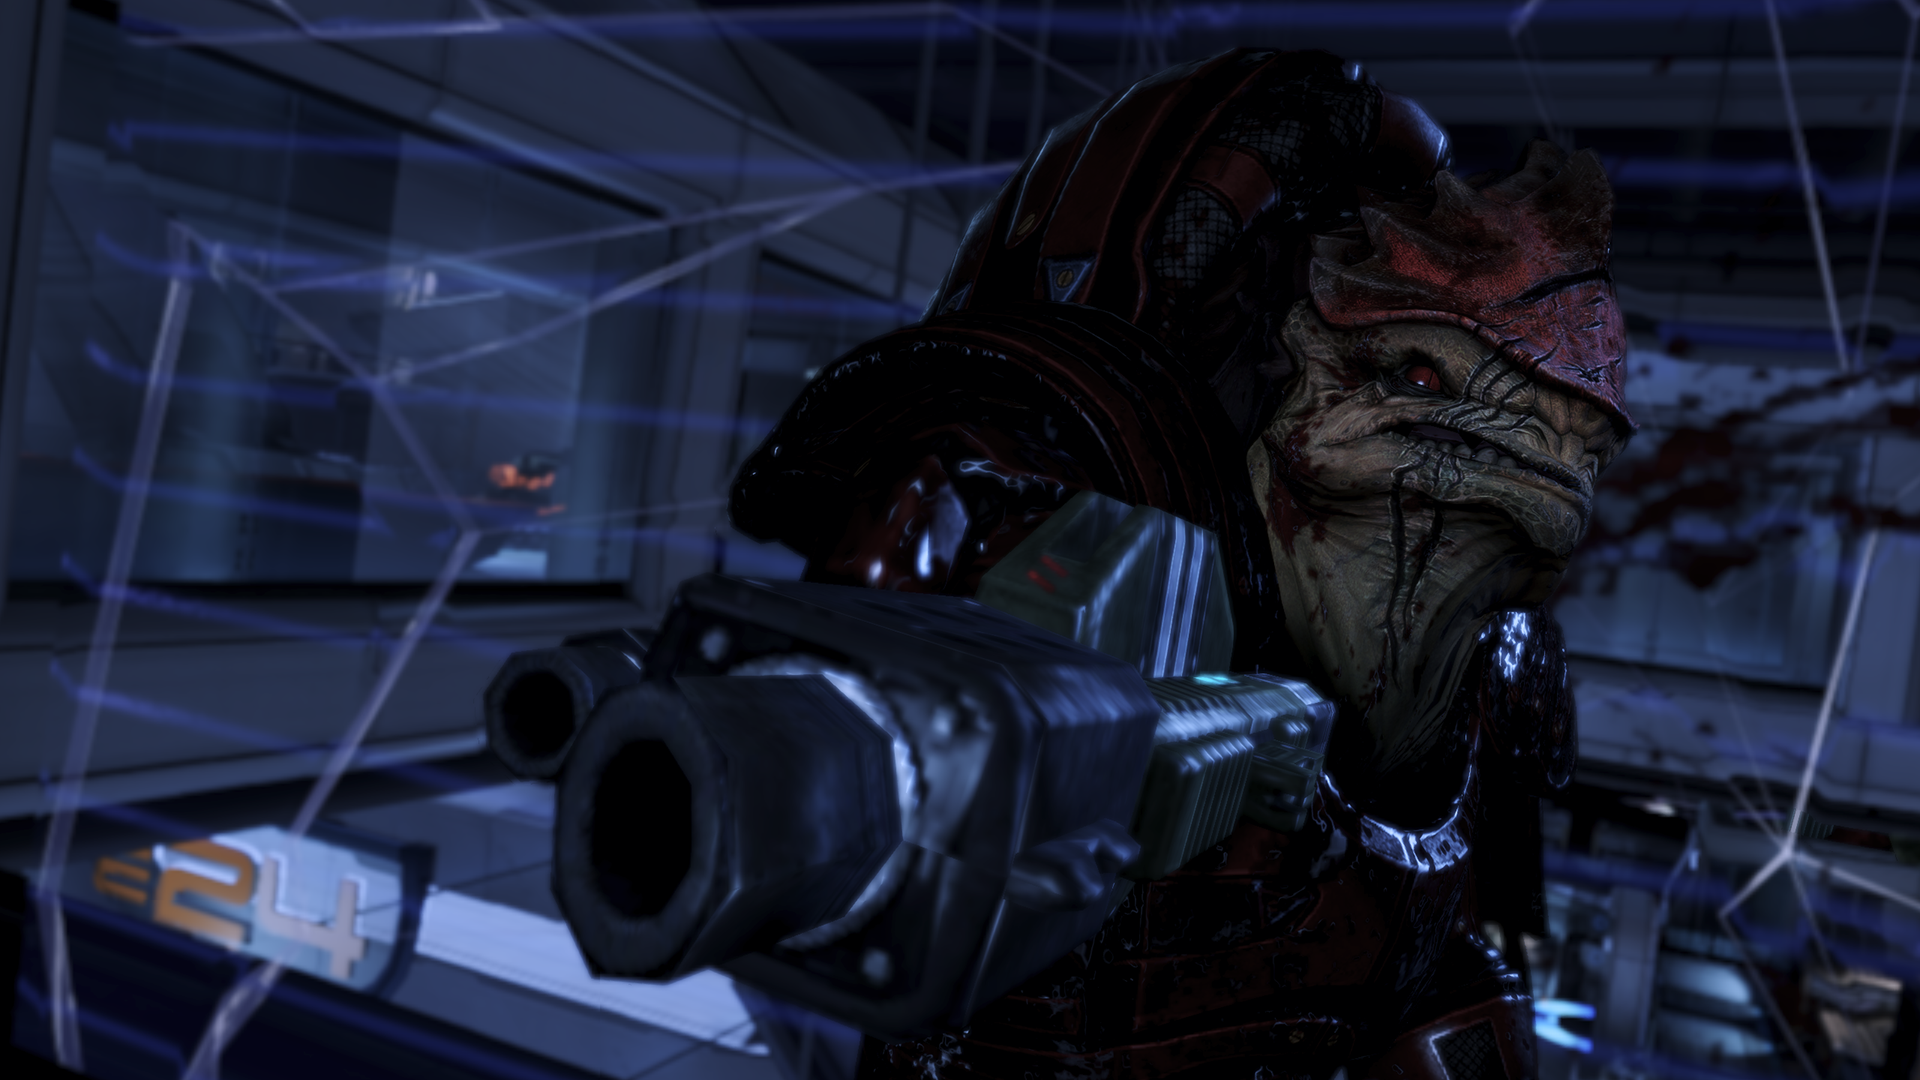 I like random pix and gifs, meet Wrex of clan Urdnot! The most badass Krogan there is, remember his name... I might keep up with the tradition of asking it hehe